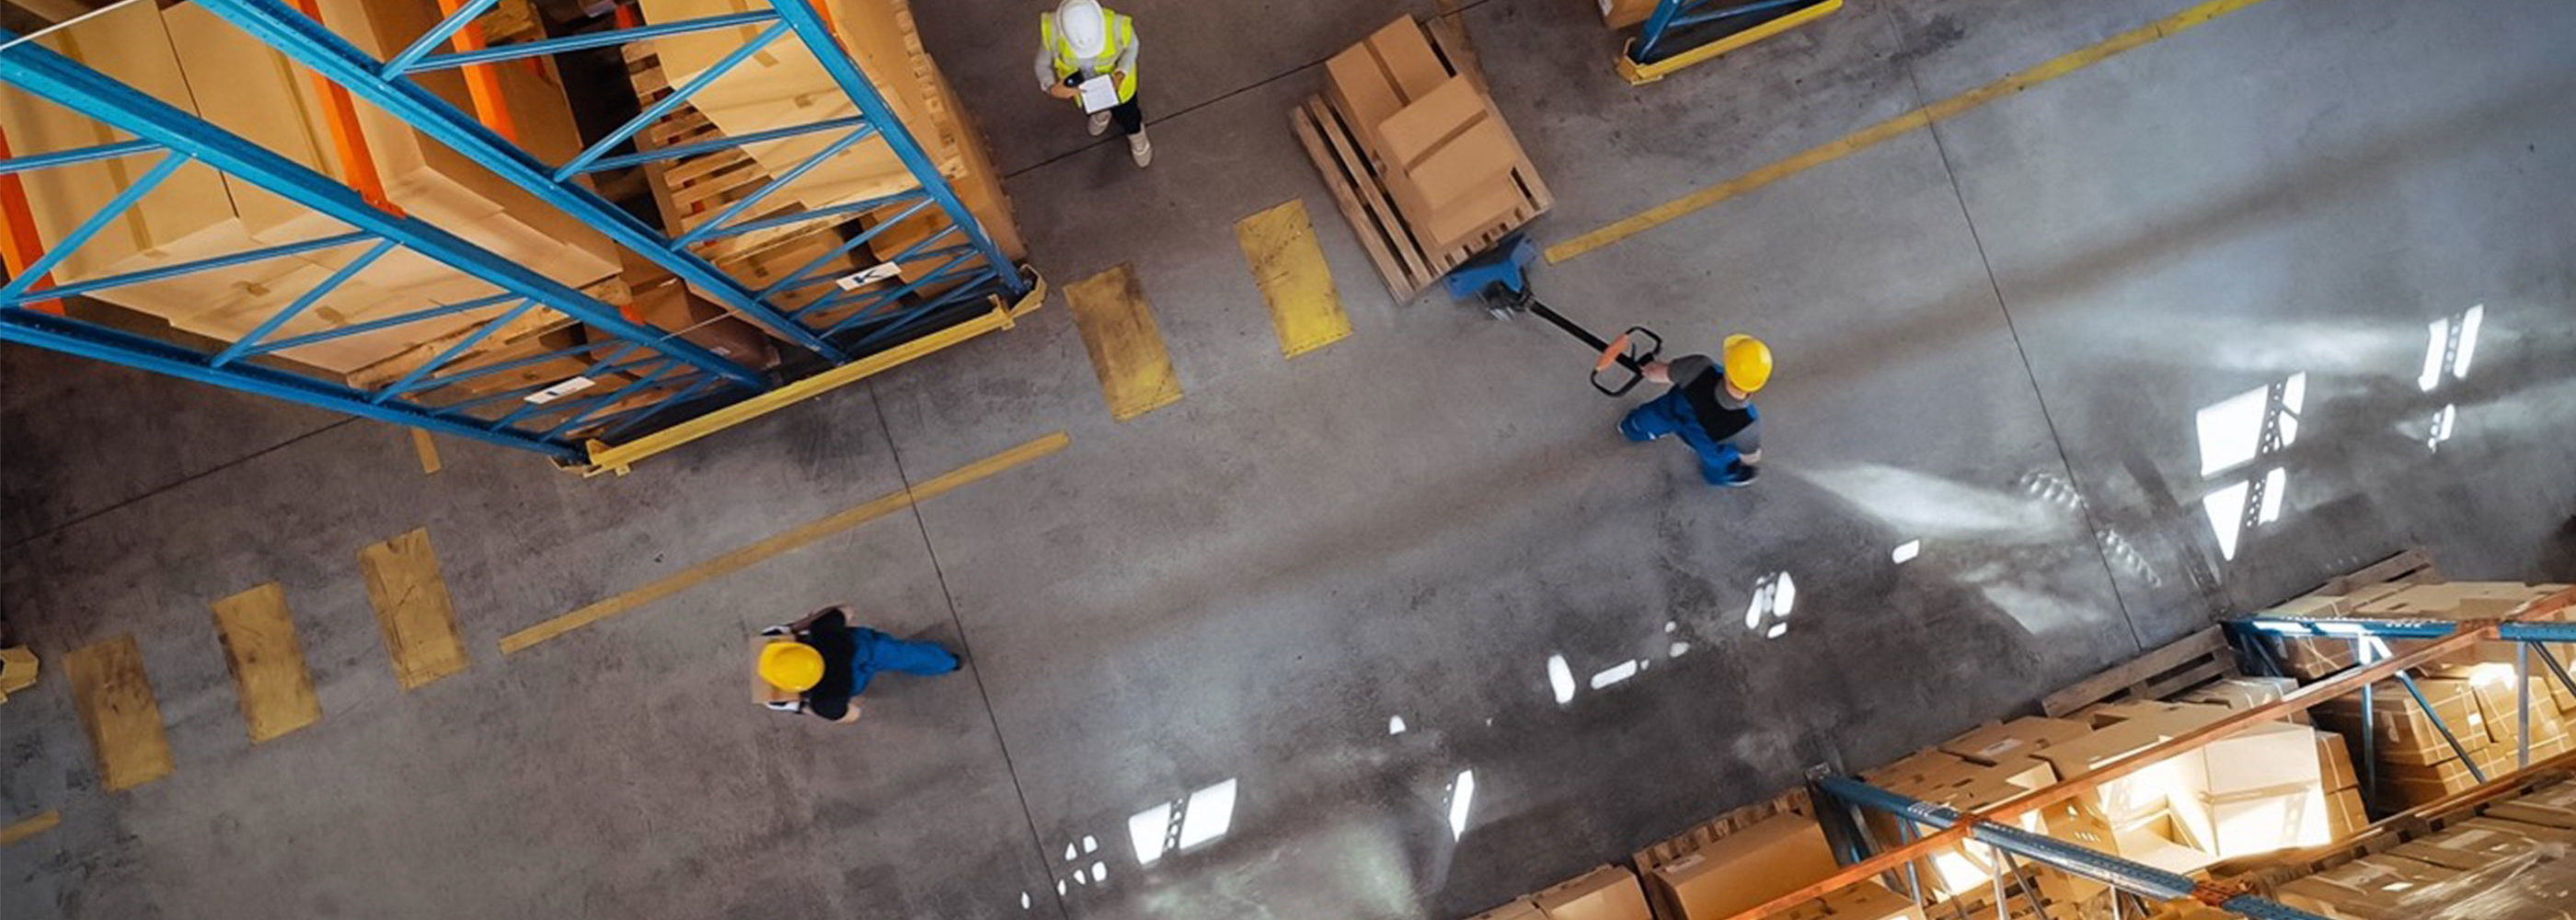 Large, busy warehouse from above